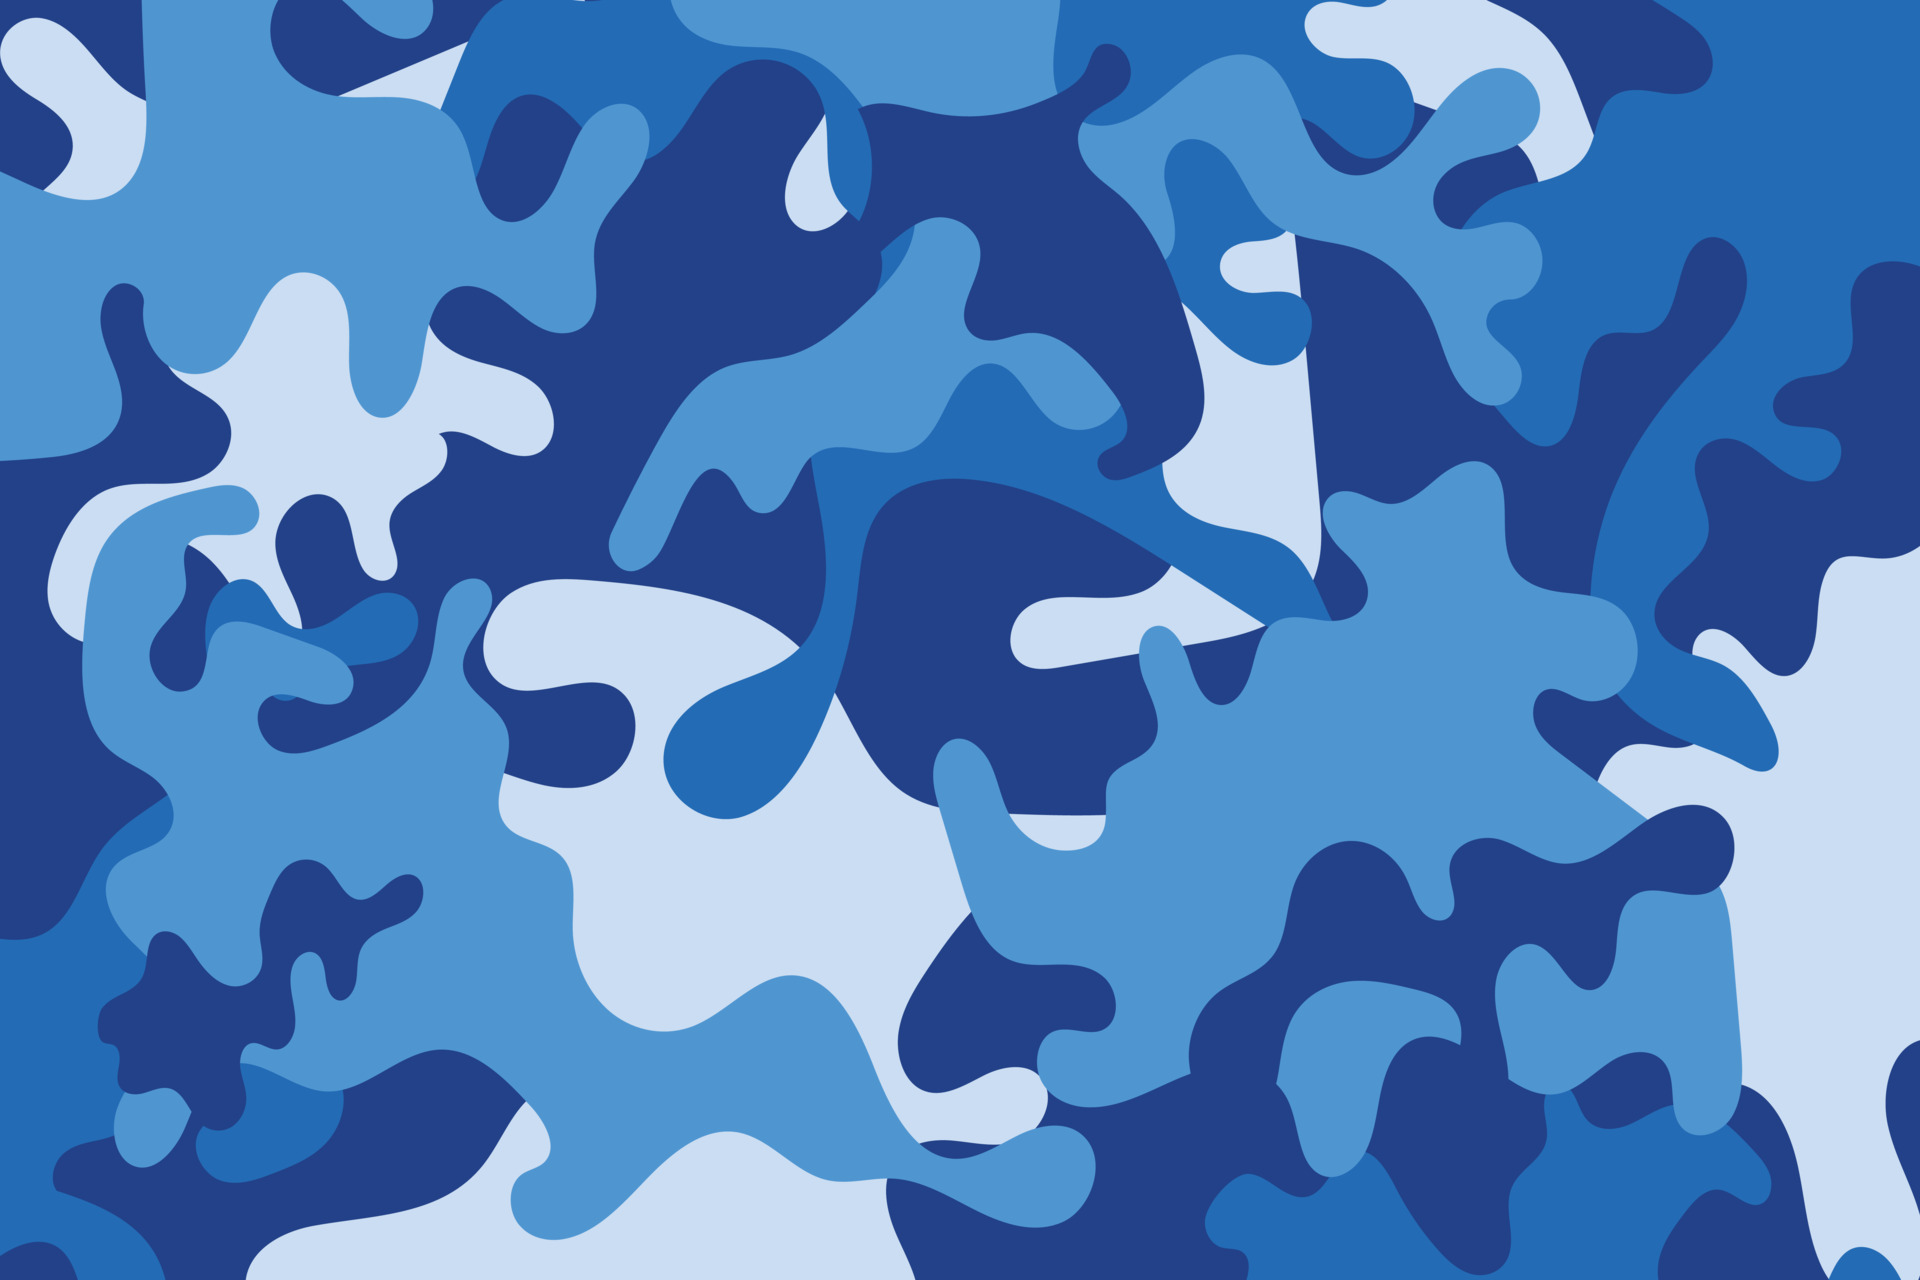 camouflage soldier pattern design background.clothing style army ...